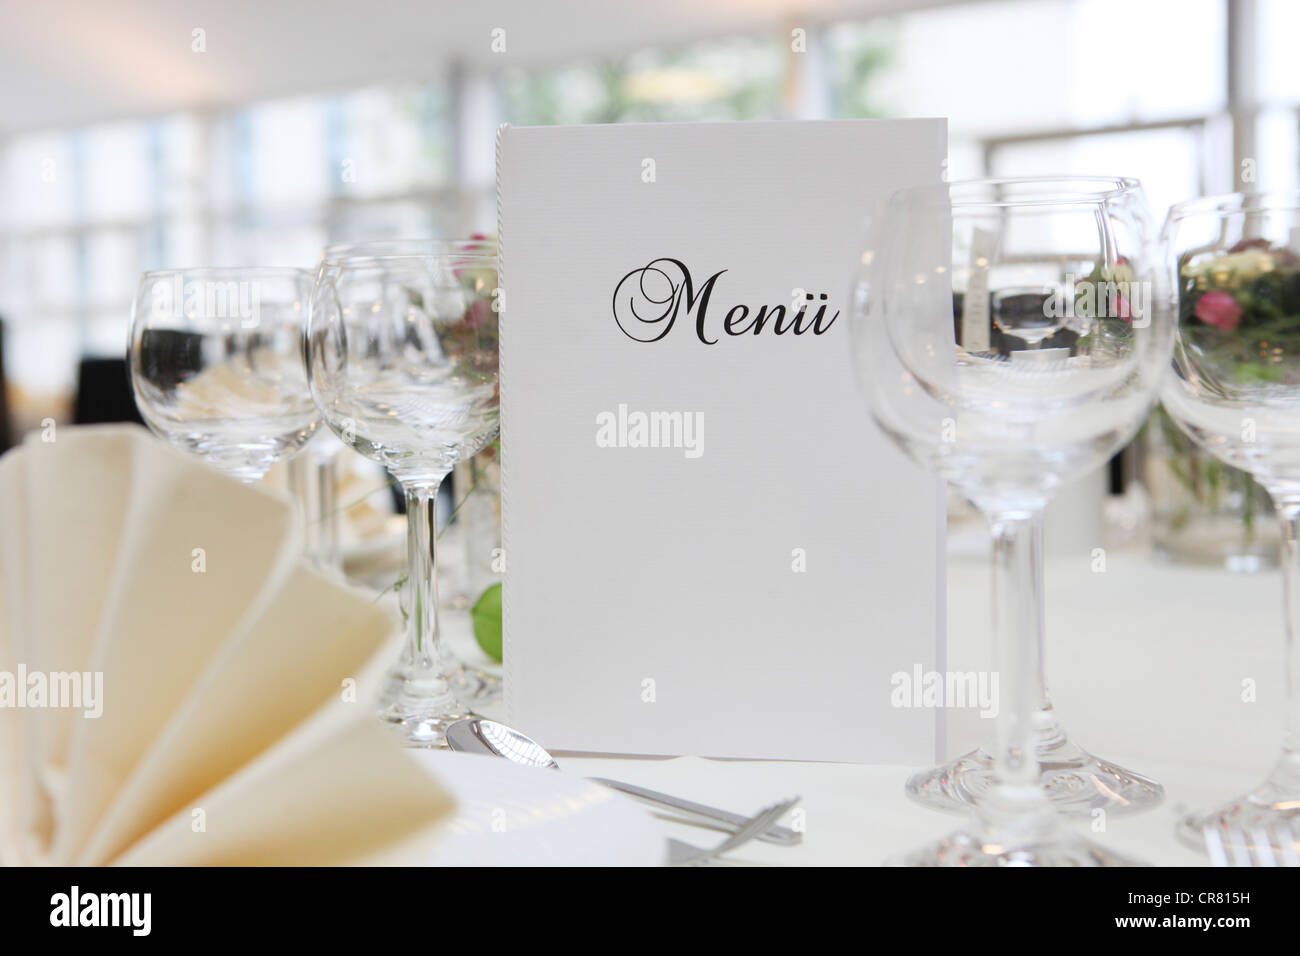 Banquet, dinner table, table decorated for a celebration with a menu card Stock Photo